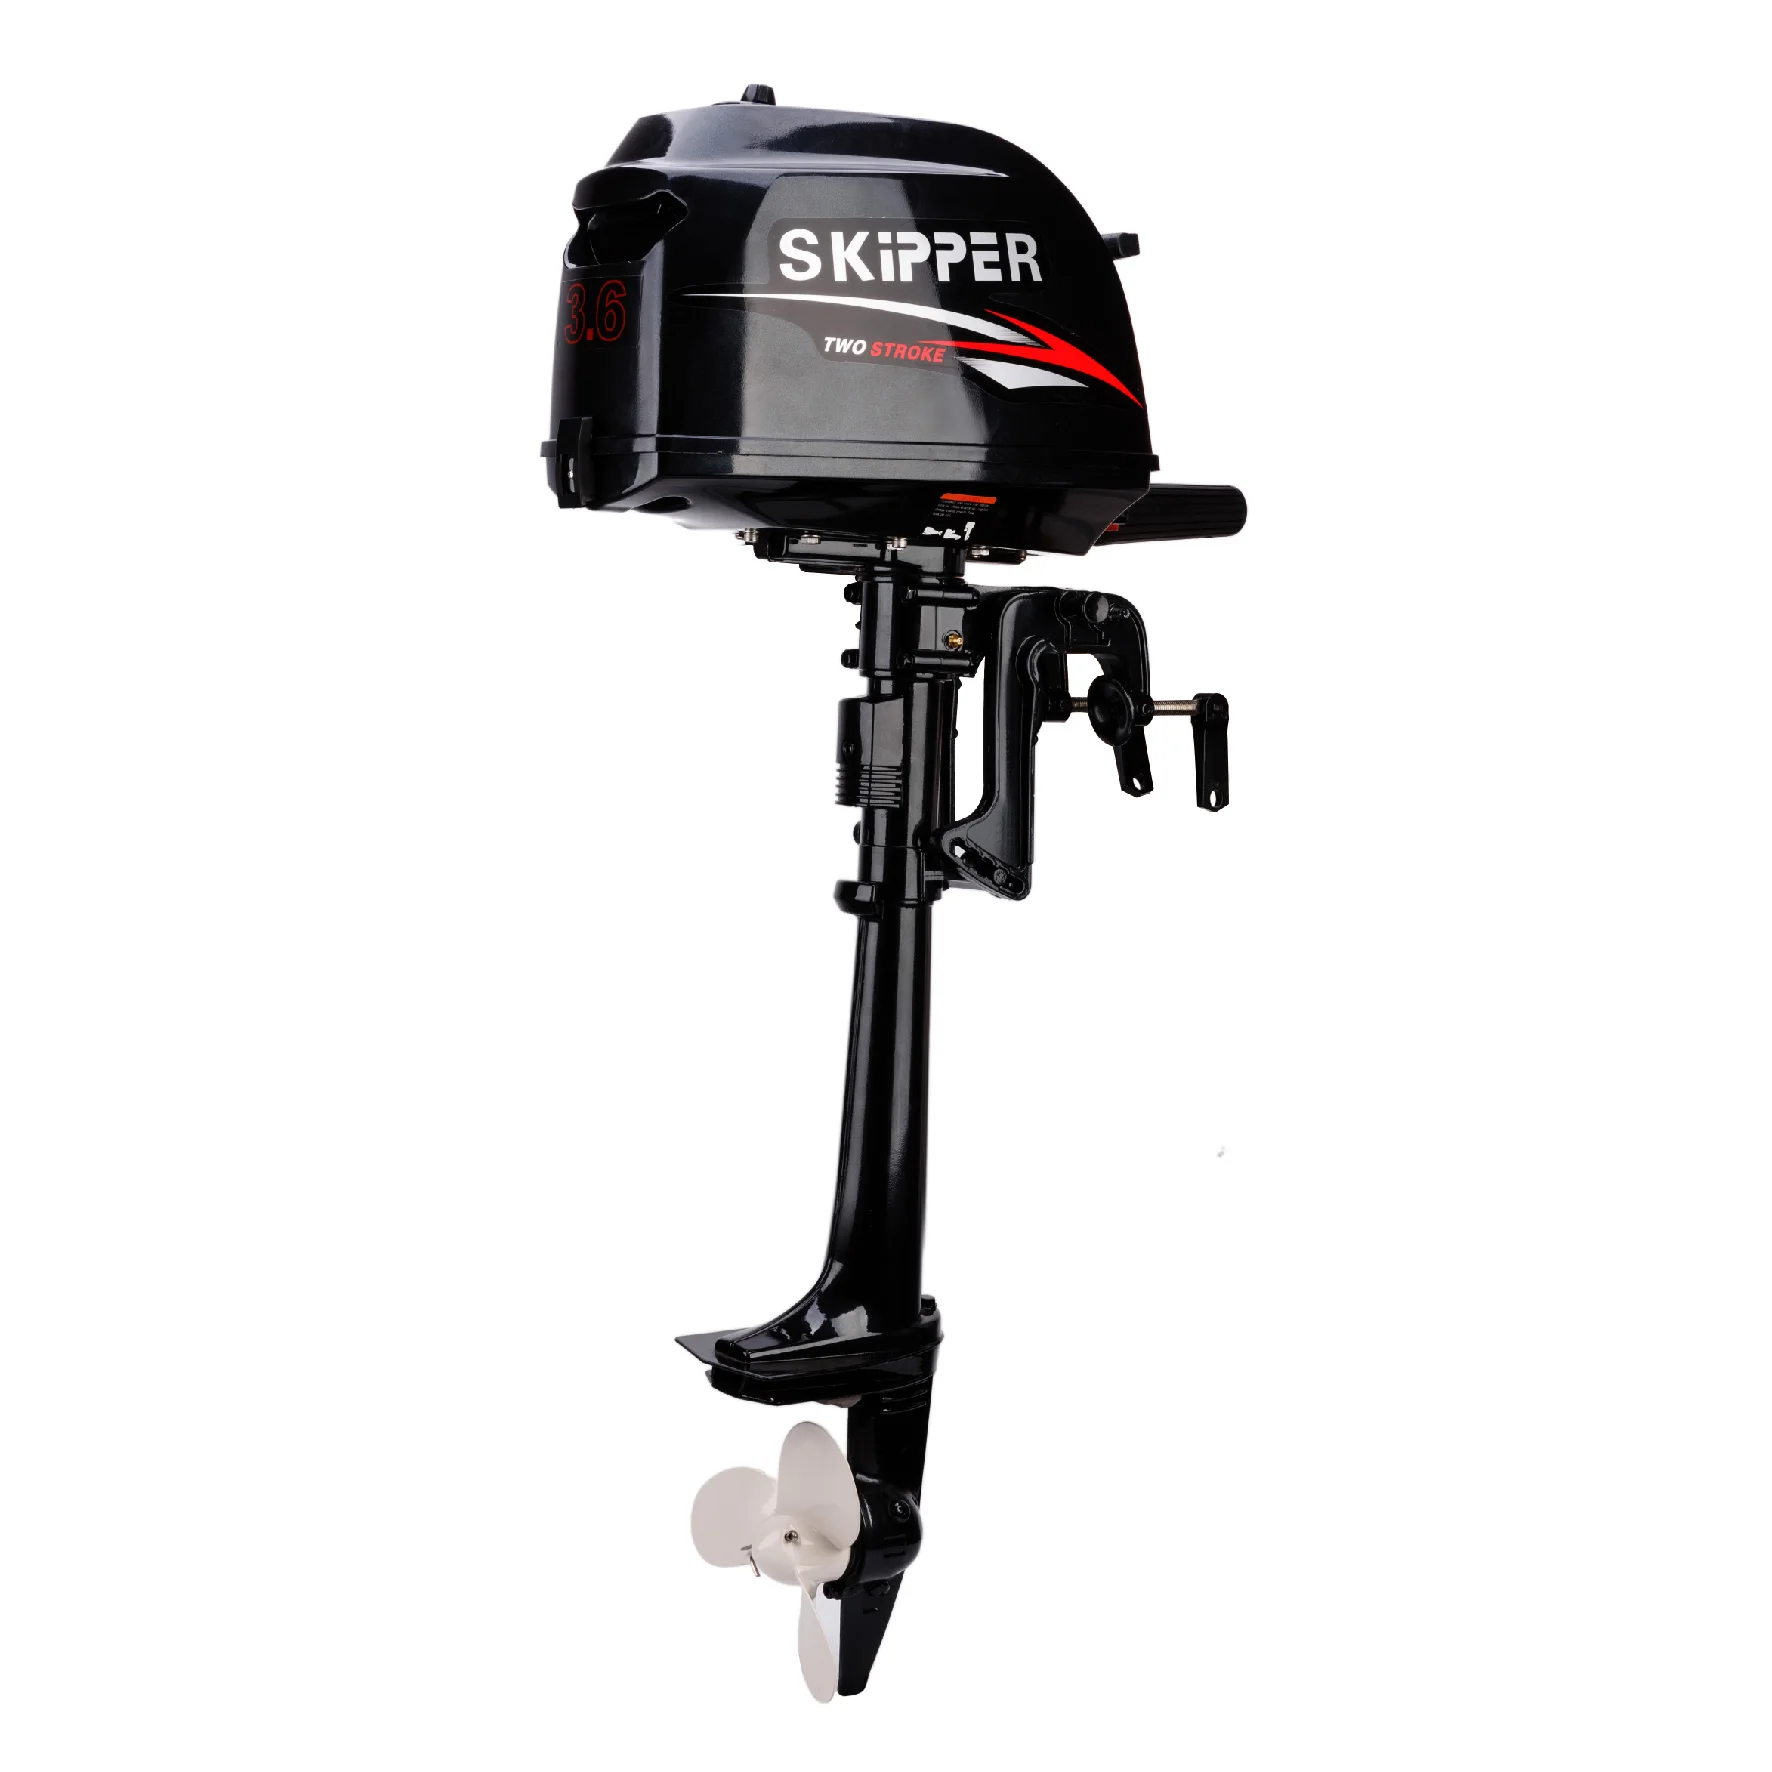 

Skipper High Quality 3.6hp Outboard Motor 2 Stroke Outboard Boat Engine